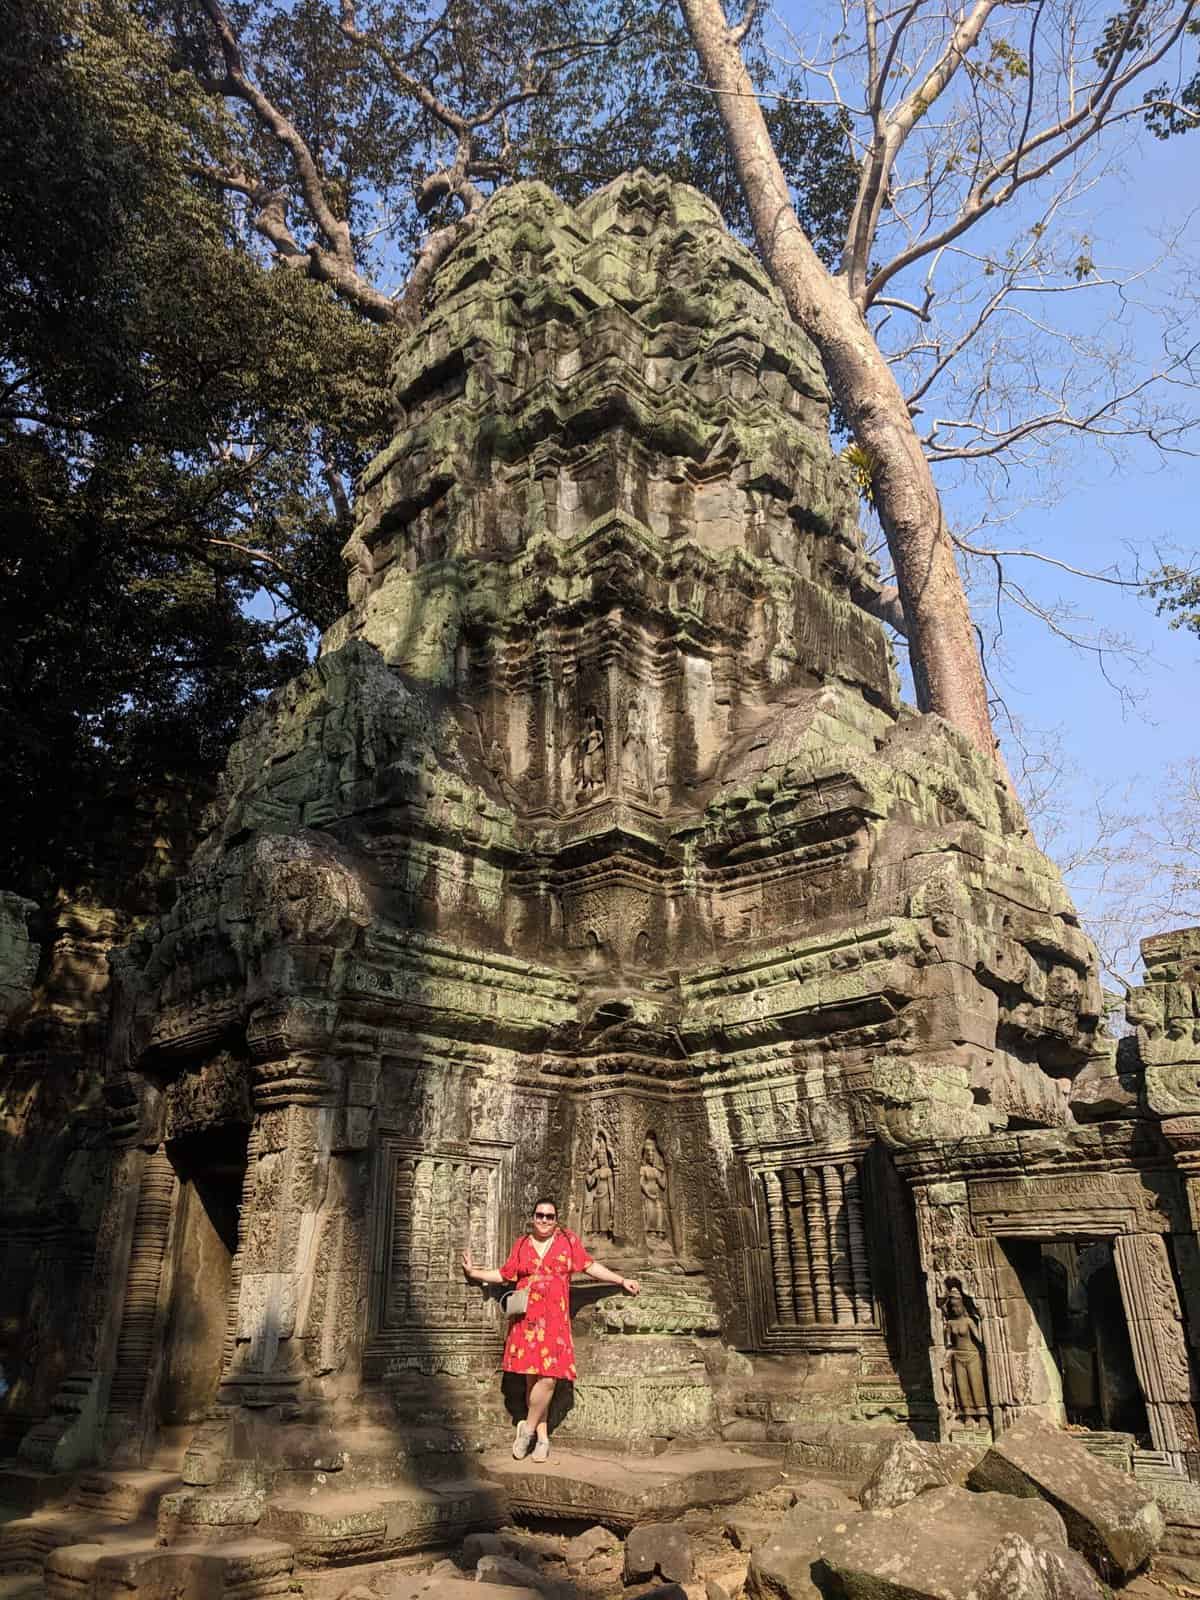 Riana standing in front of a large green temple at Angkor Wat, Cambodia in 2019